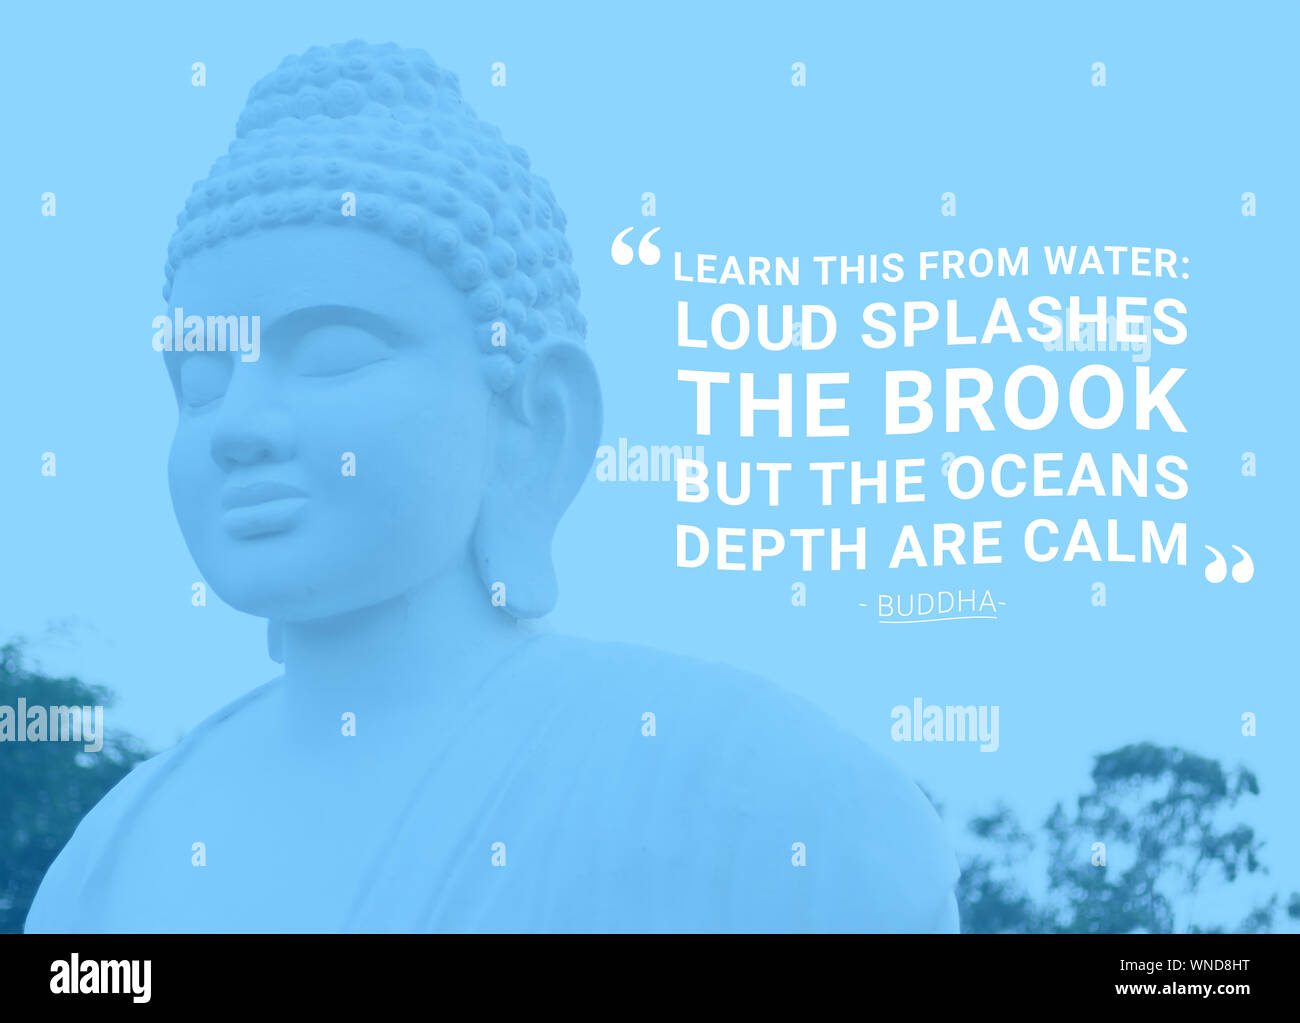 Learn this from water loud splashes the brook but the oceans depth are calm - buddha Stock Photo